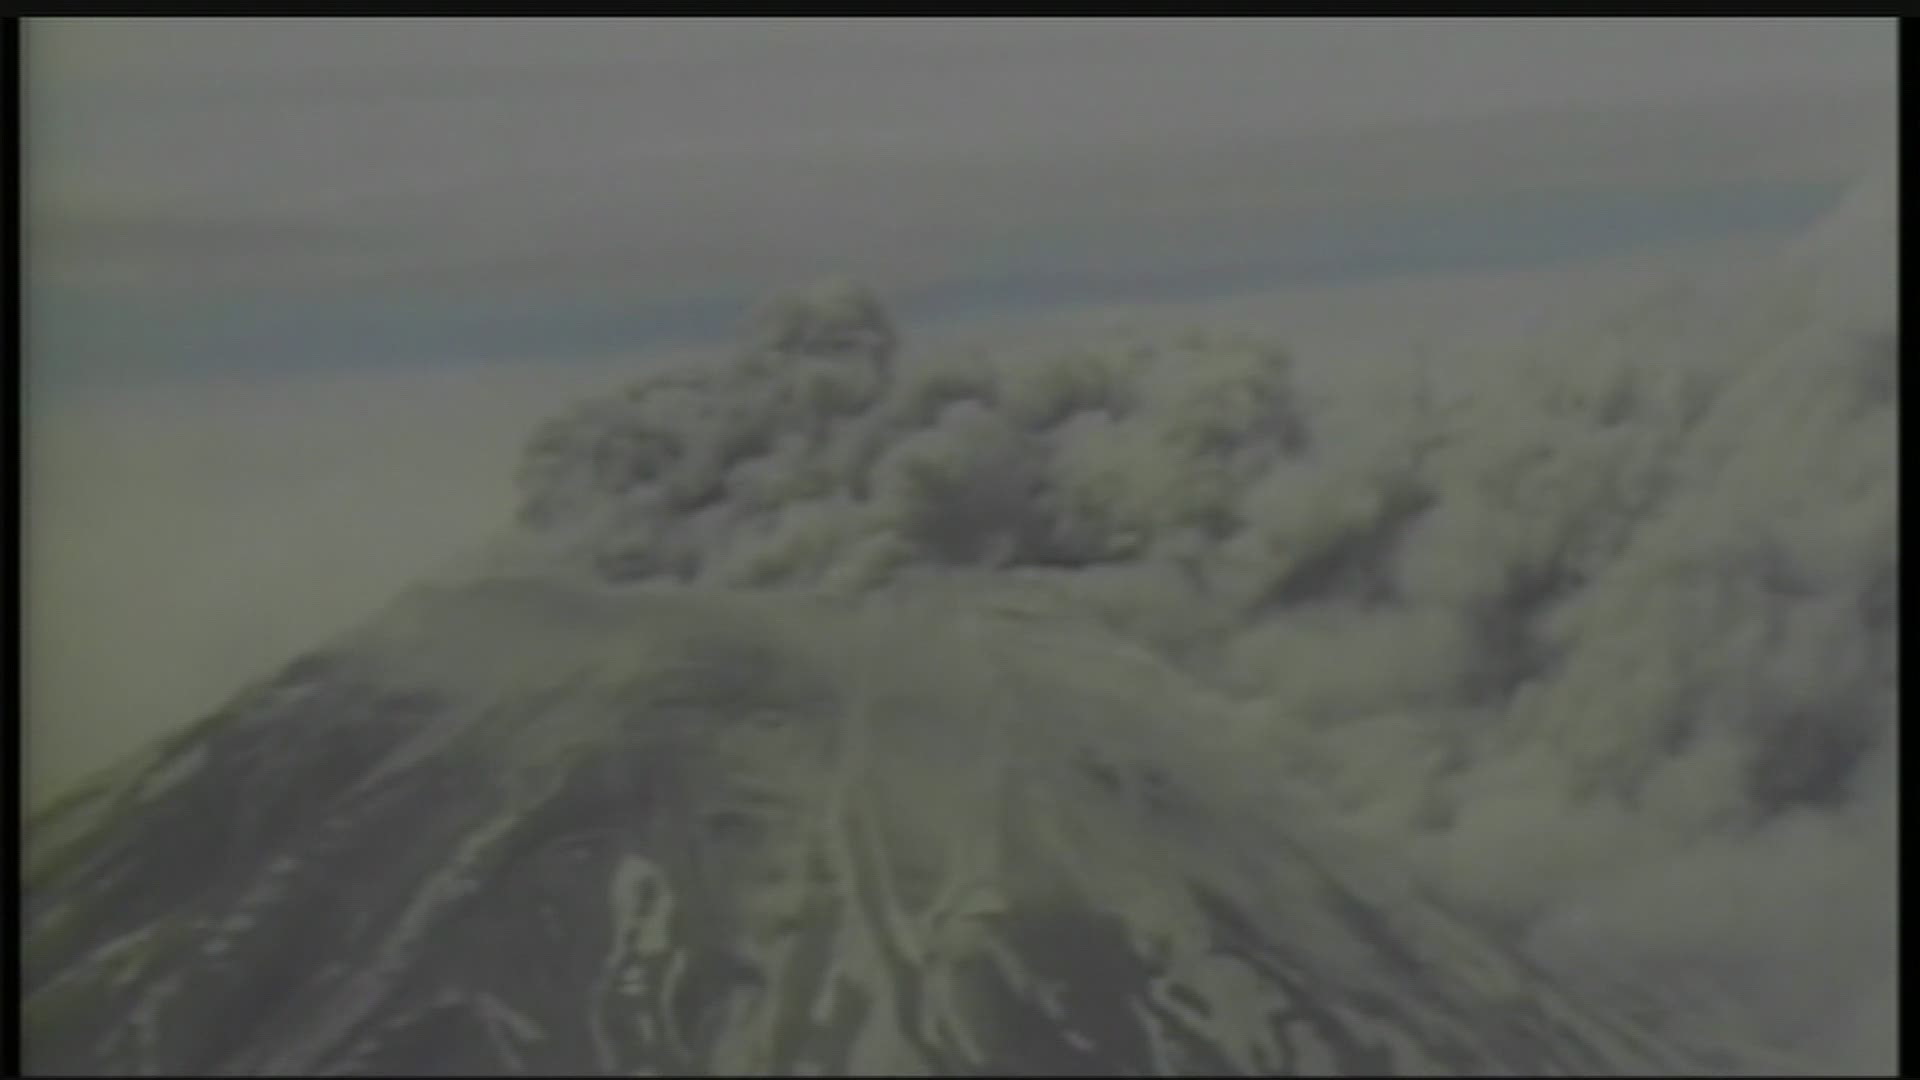 Video from the KREM archives shows the eruption of Mount St. Helens on May 18, 1980. Fity-seven people lost their lives.